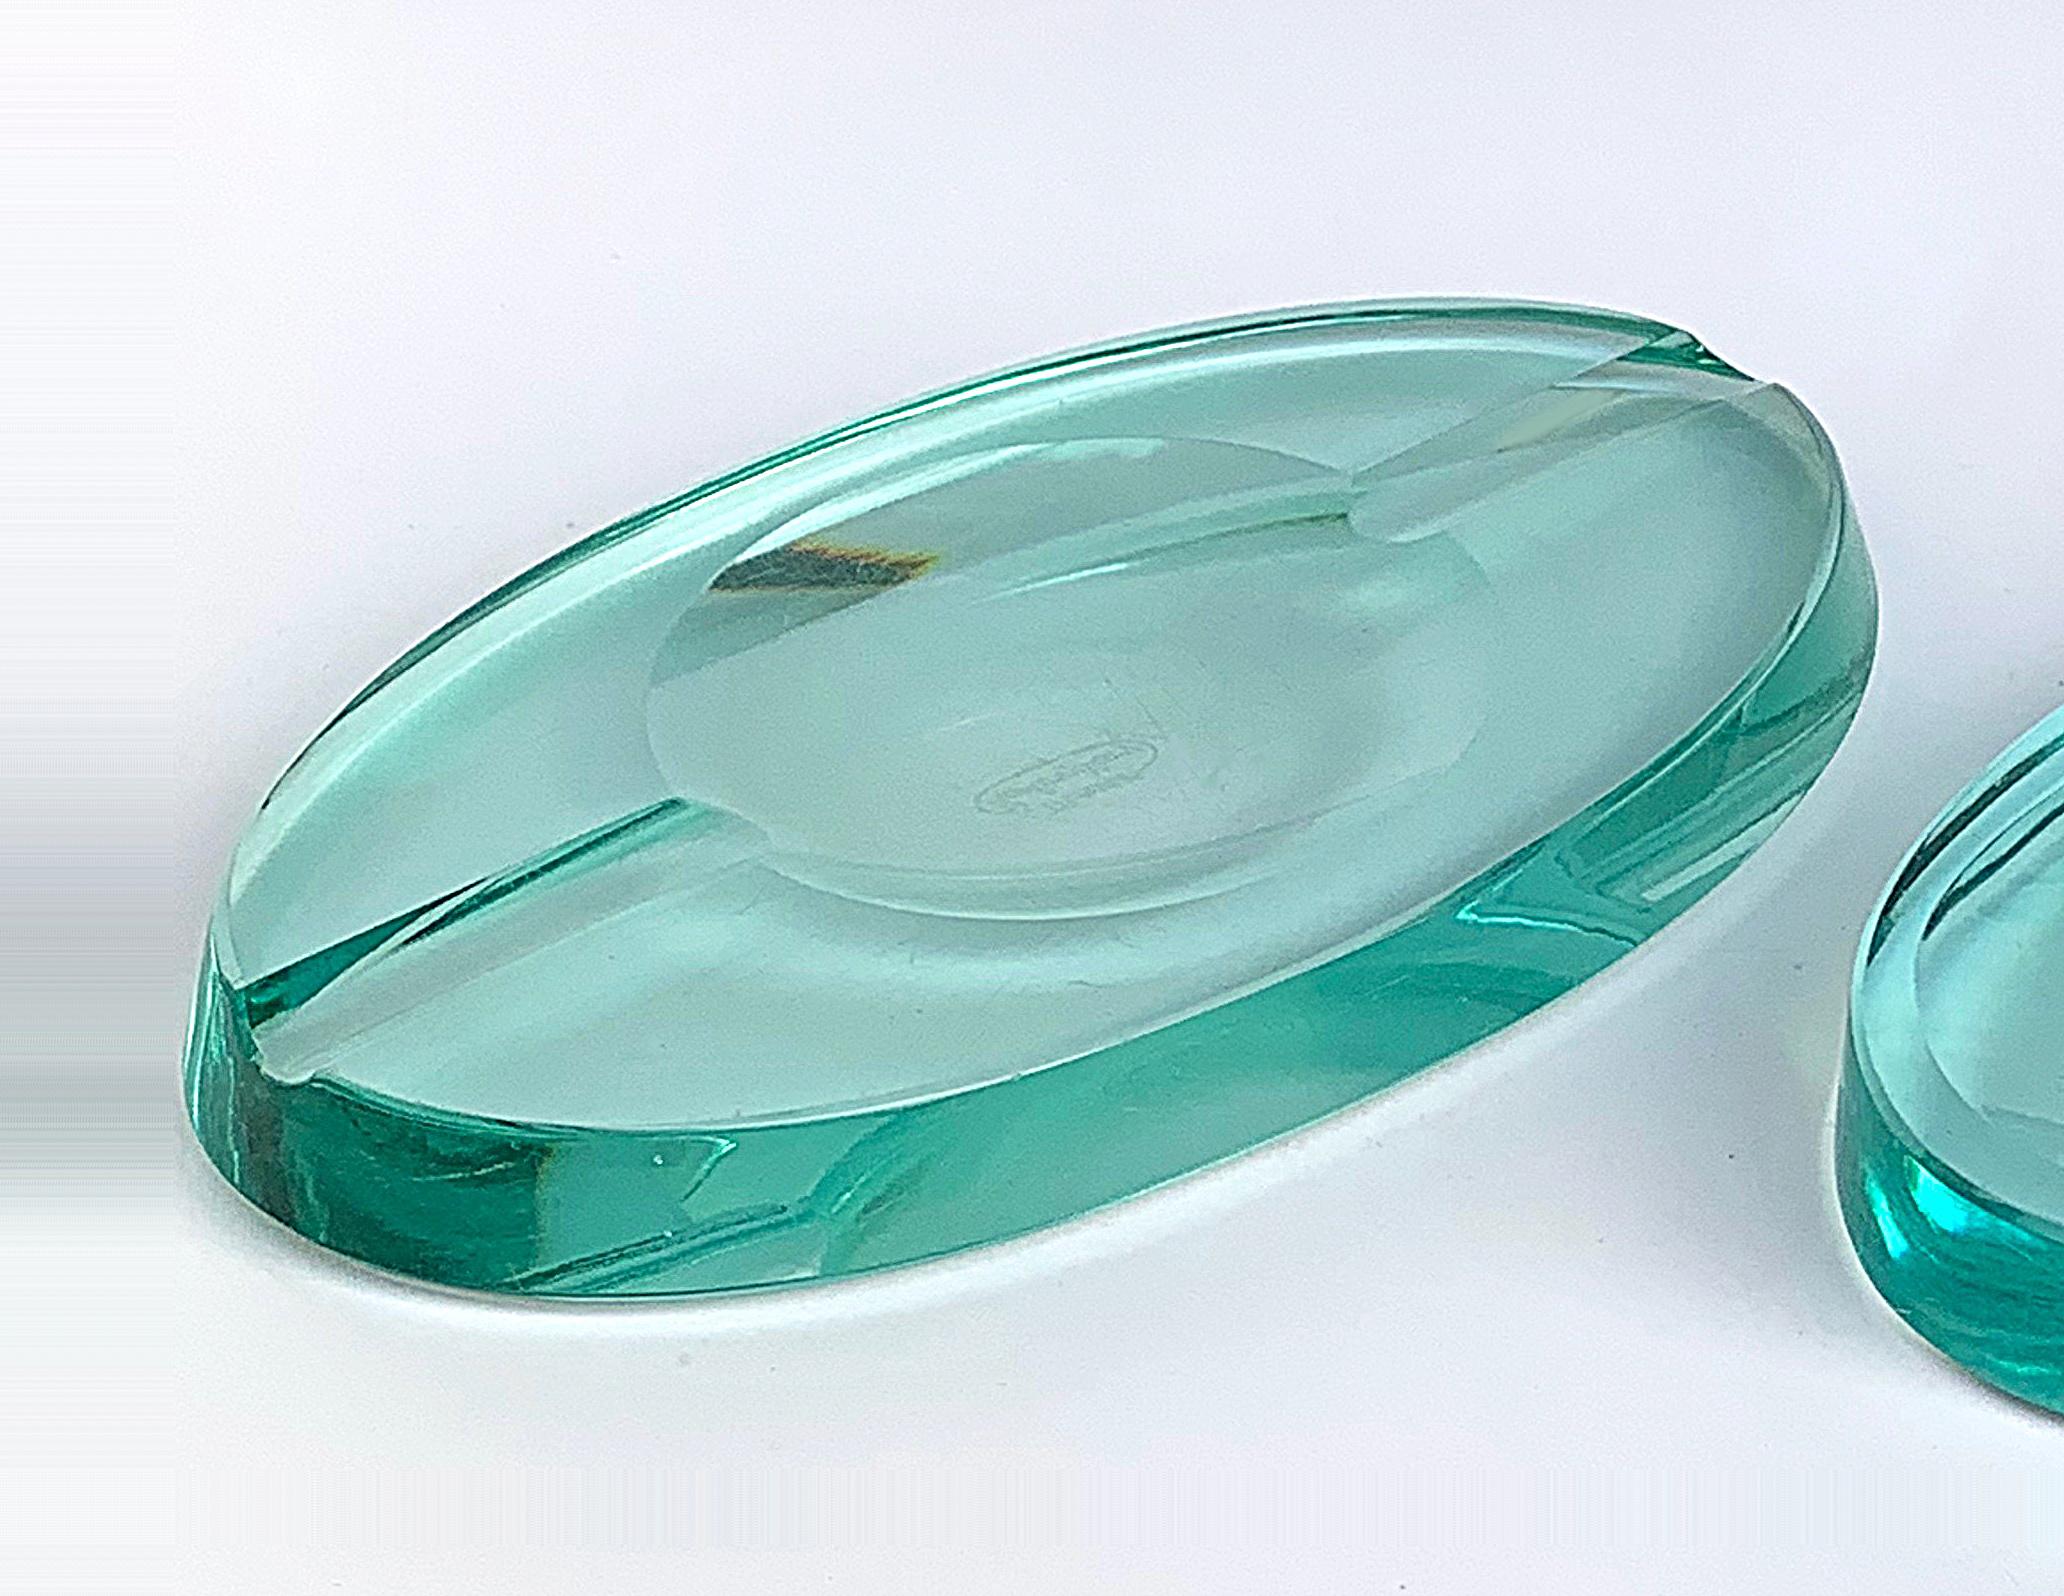 Other Karlovy Vary Moser, Ashtray Aquamarine Faceted Crystal Czech Republic, 1950s